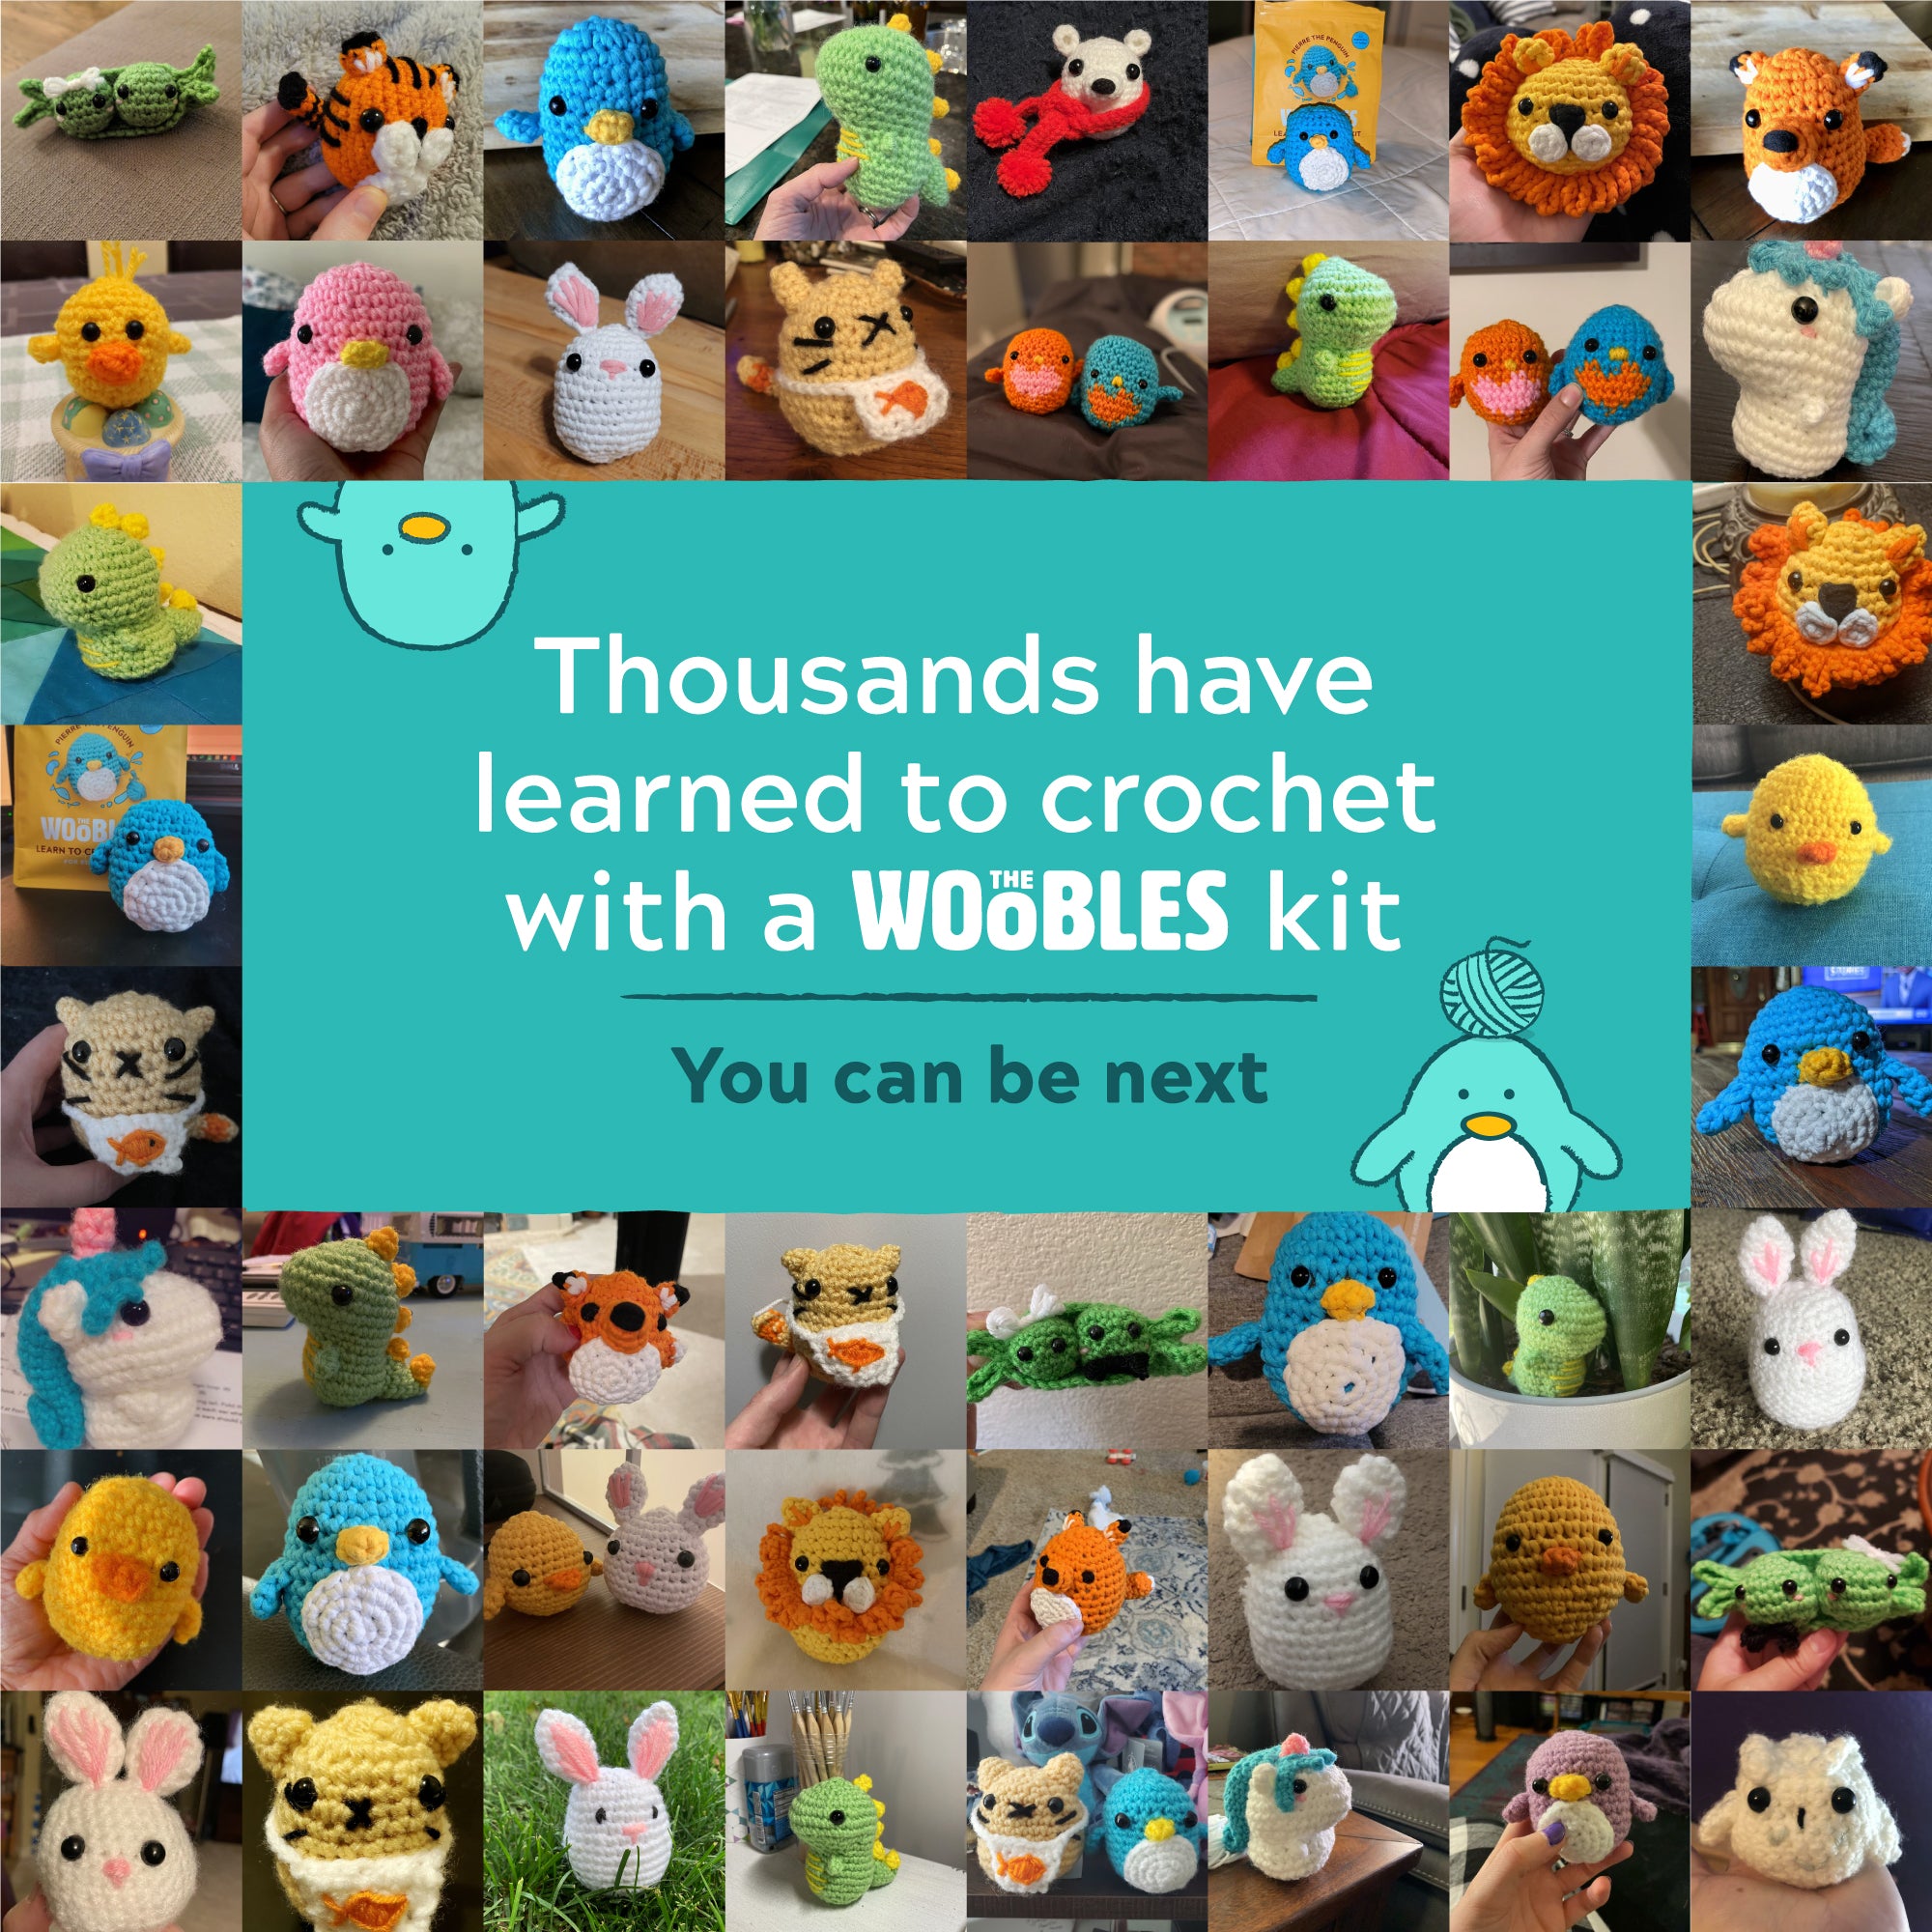 The Woobles kits are a perfect way to start crocheting because everyth